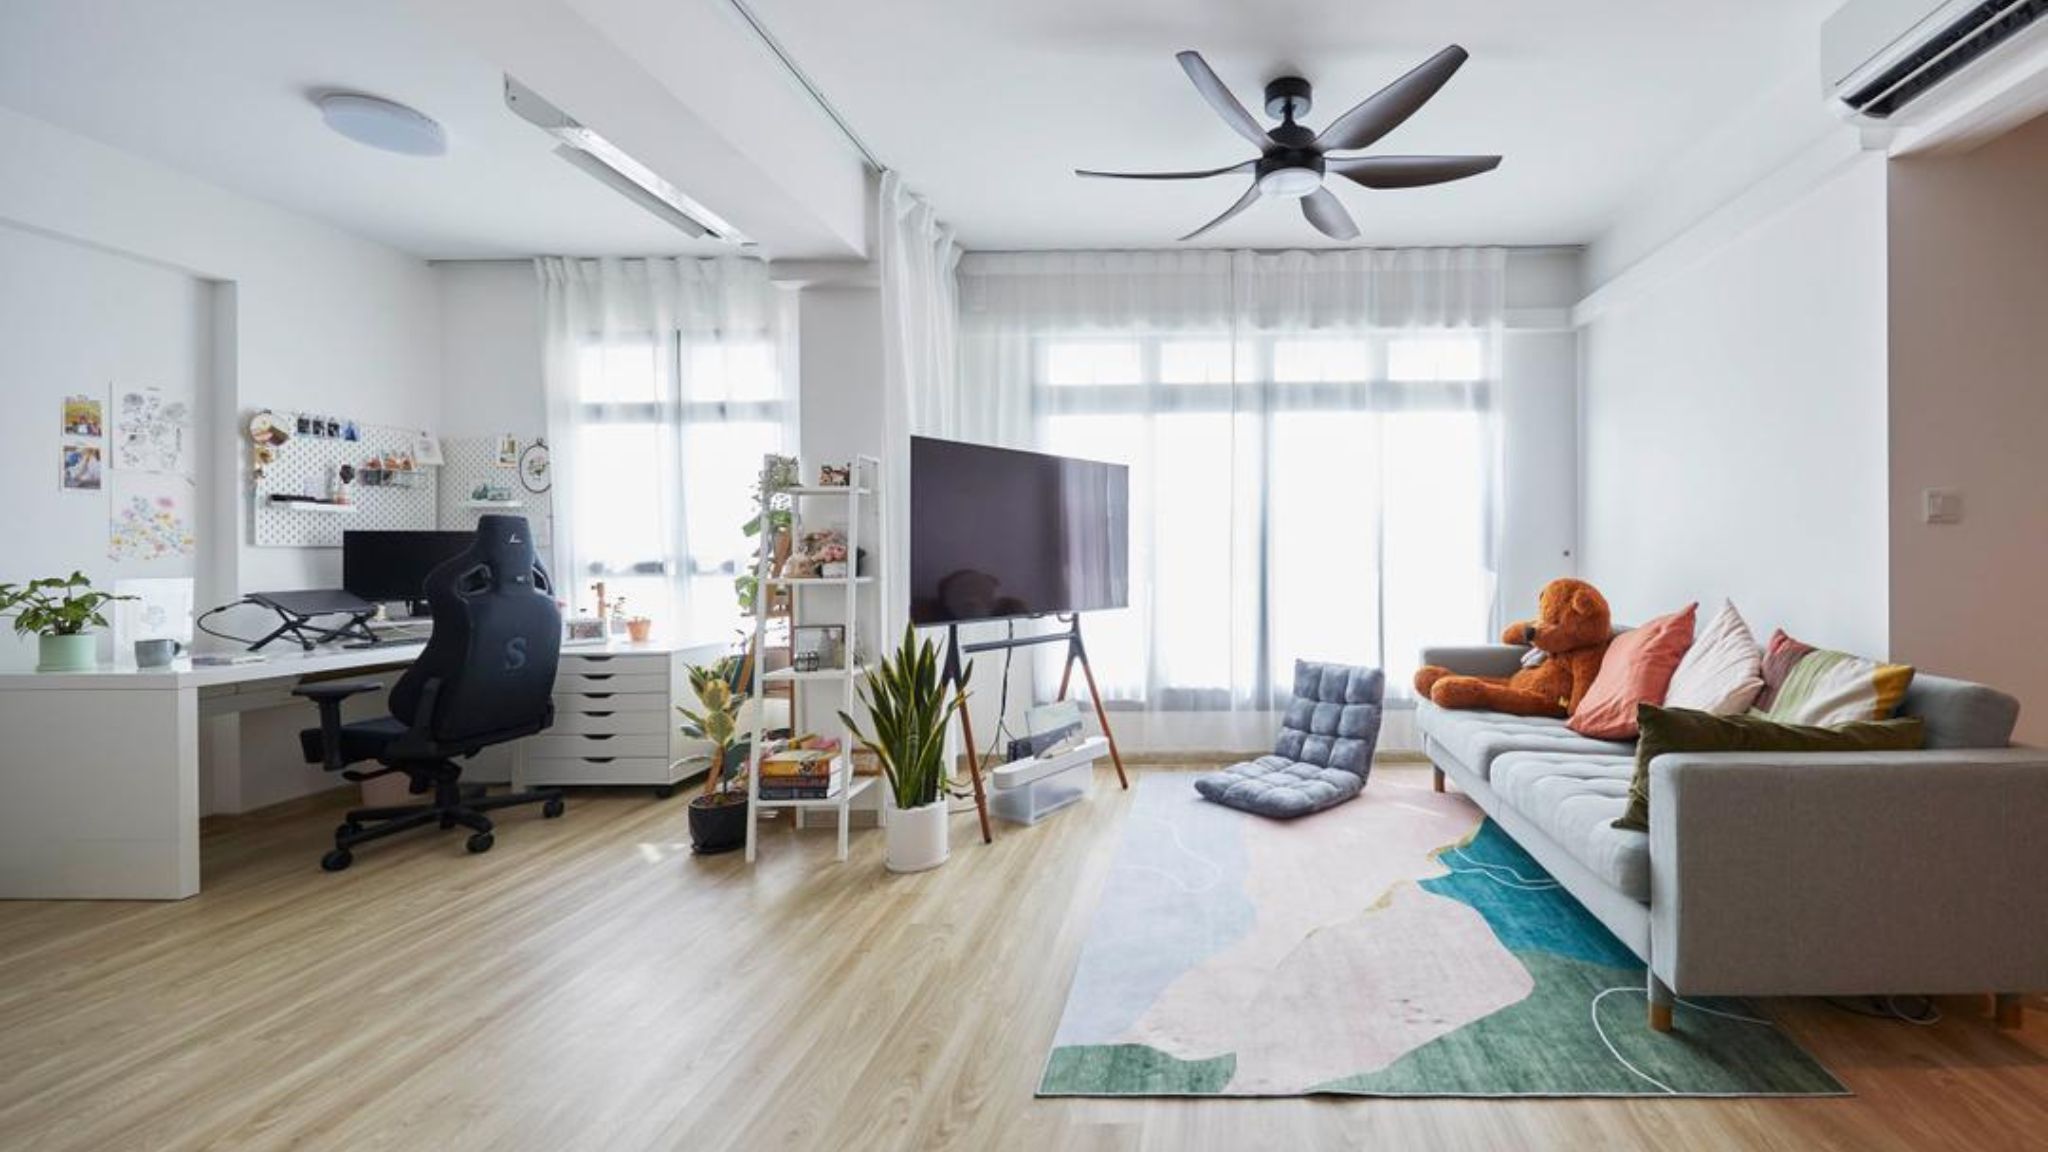 6 Stylish Open Concept Designs for HDB Flats